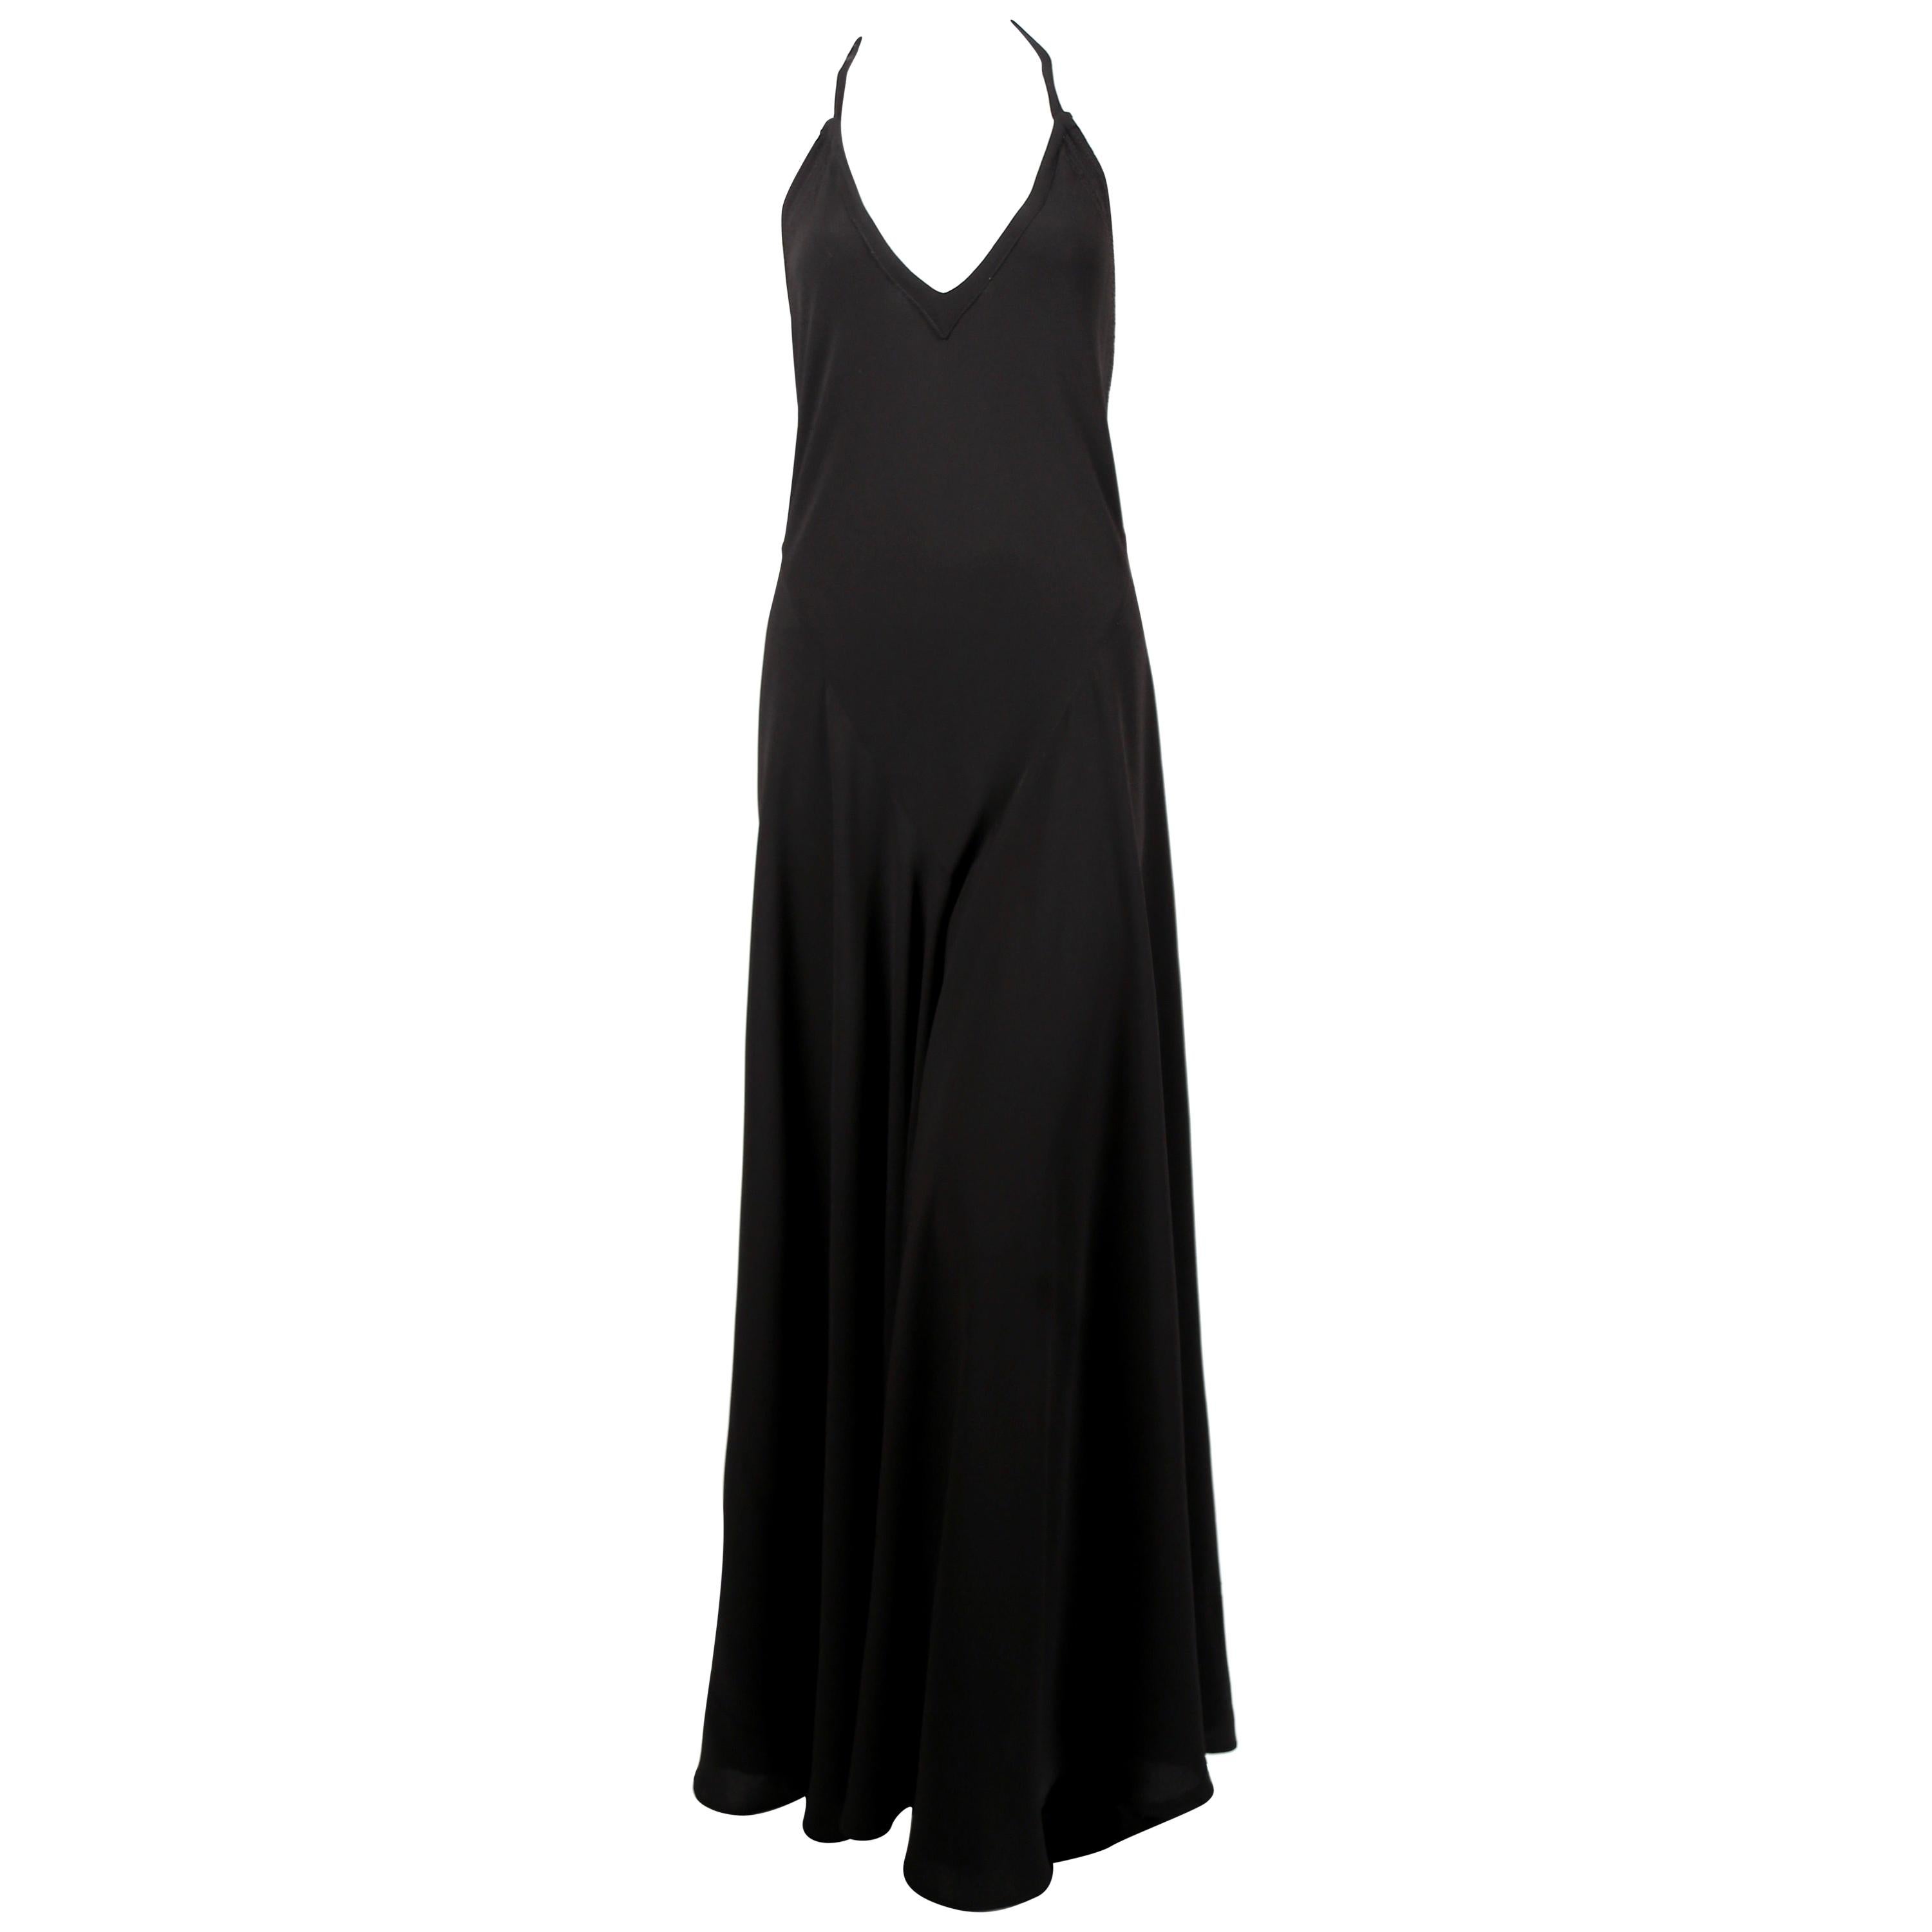 1970's OSSIE CLARK For QUORUM black bias-cut maxi gown with low back For Sale